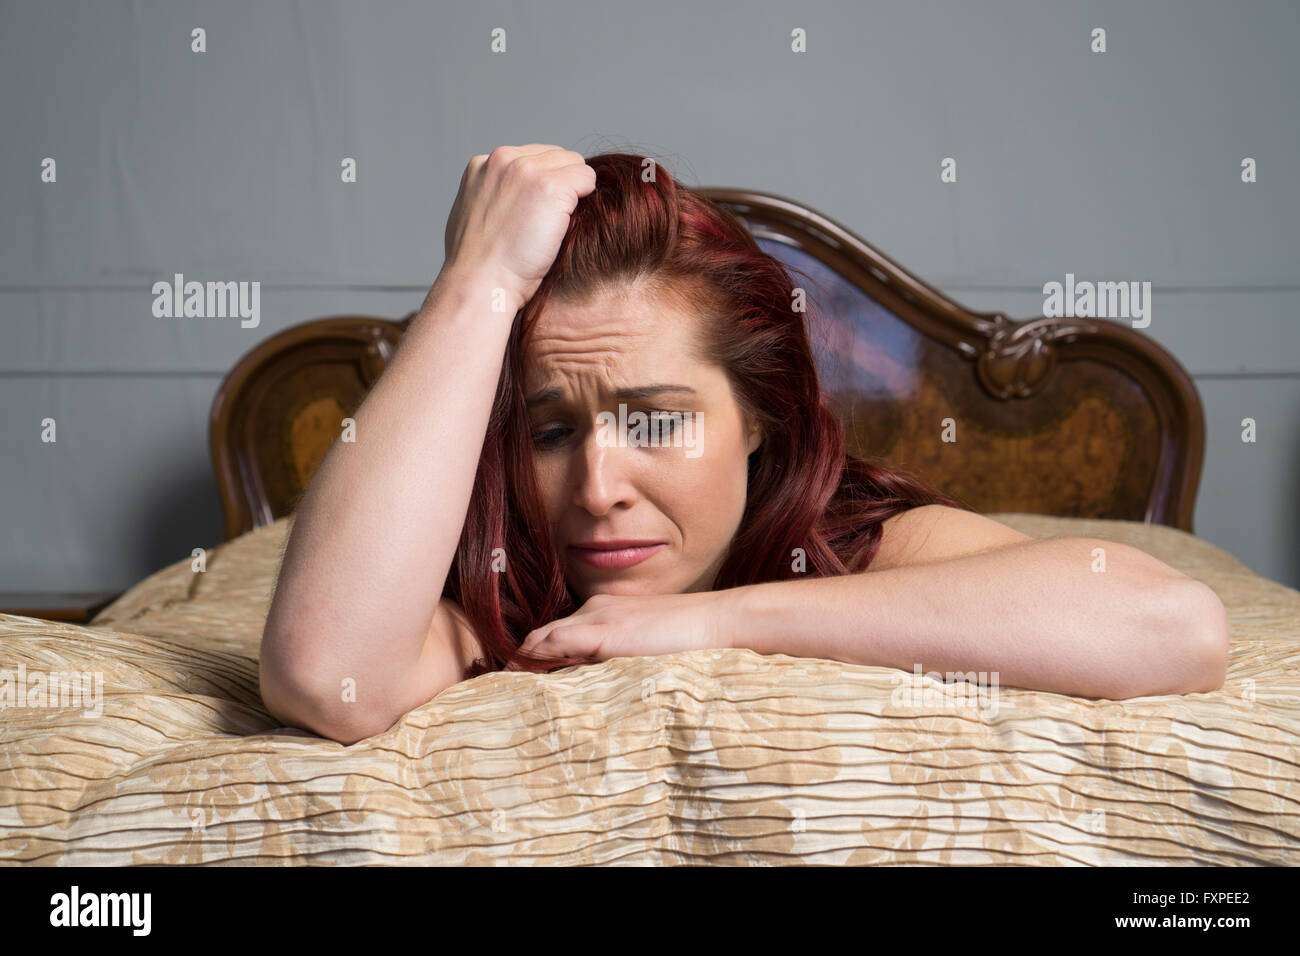 Miserable woman in bed Stock Photo